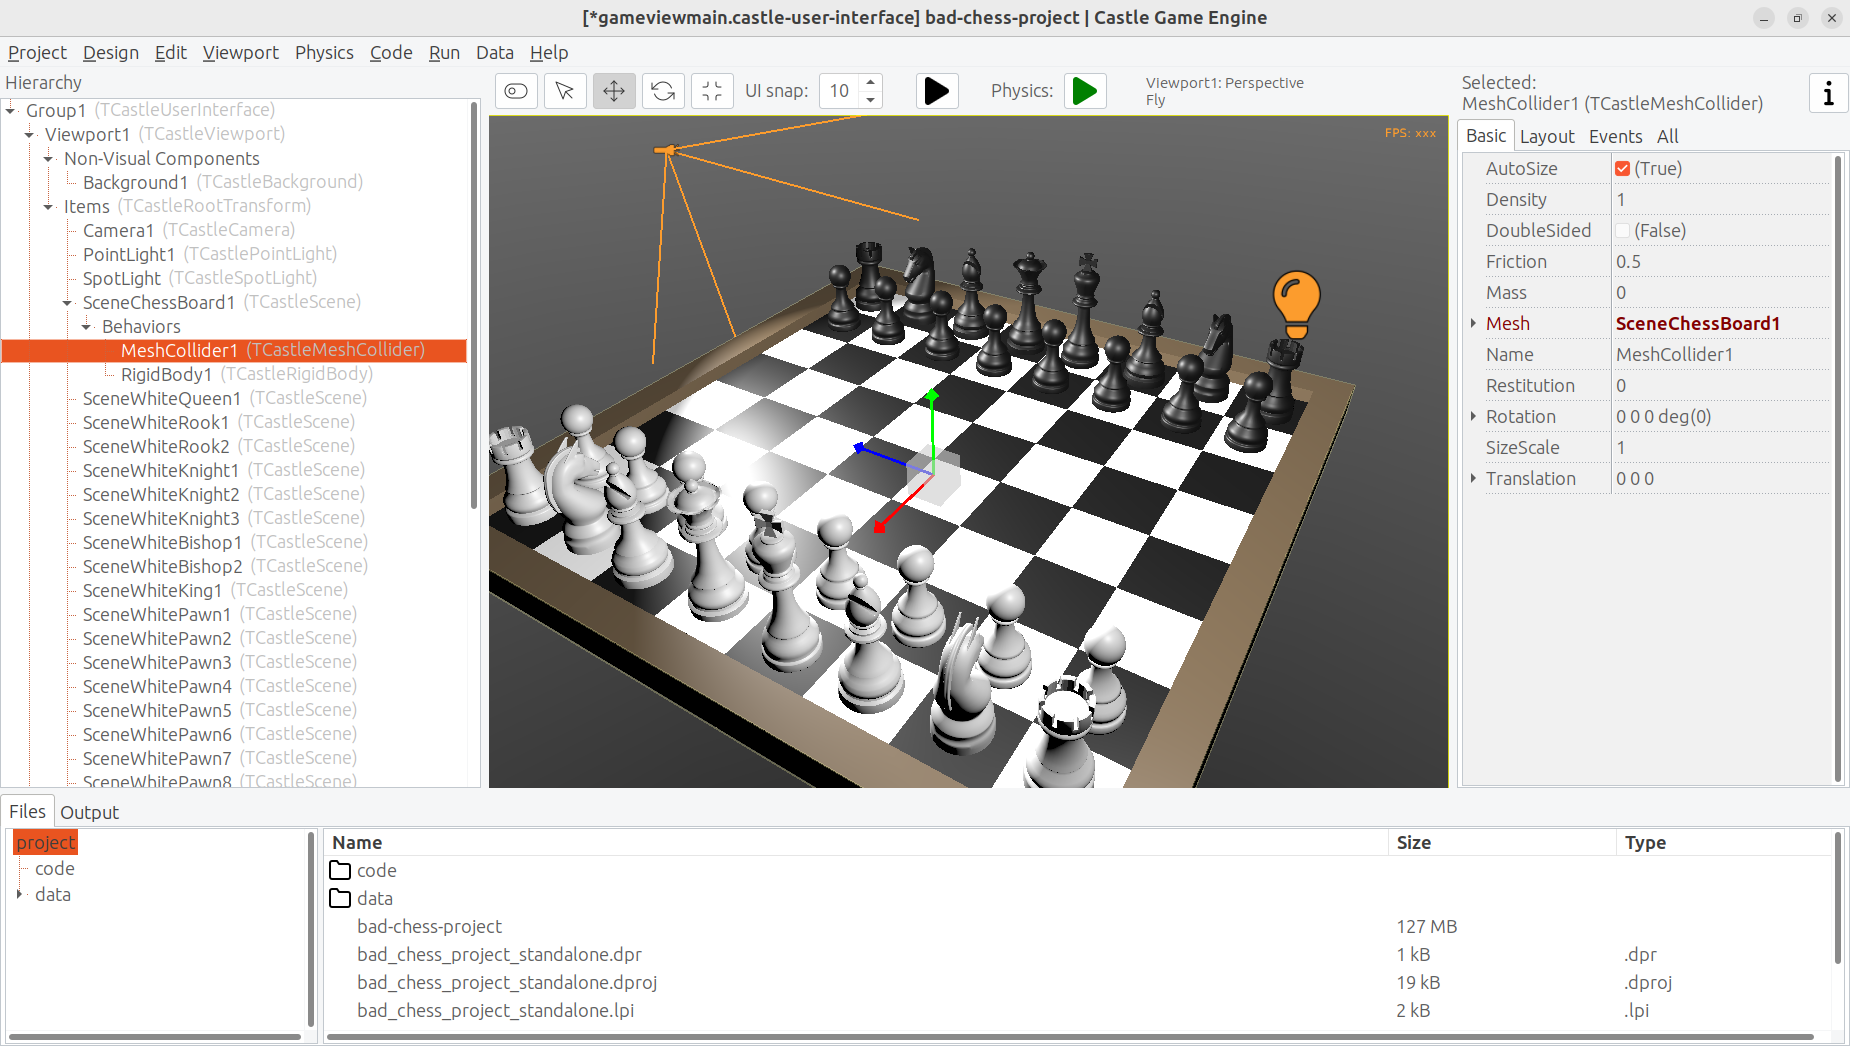 Chessboard with rigid body and colliders